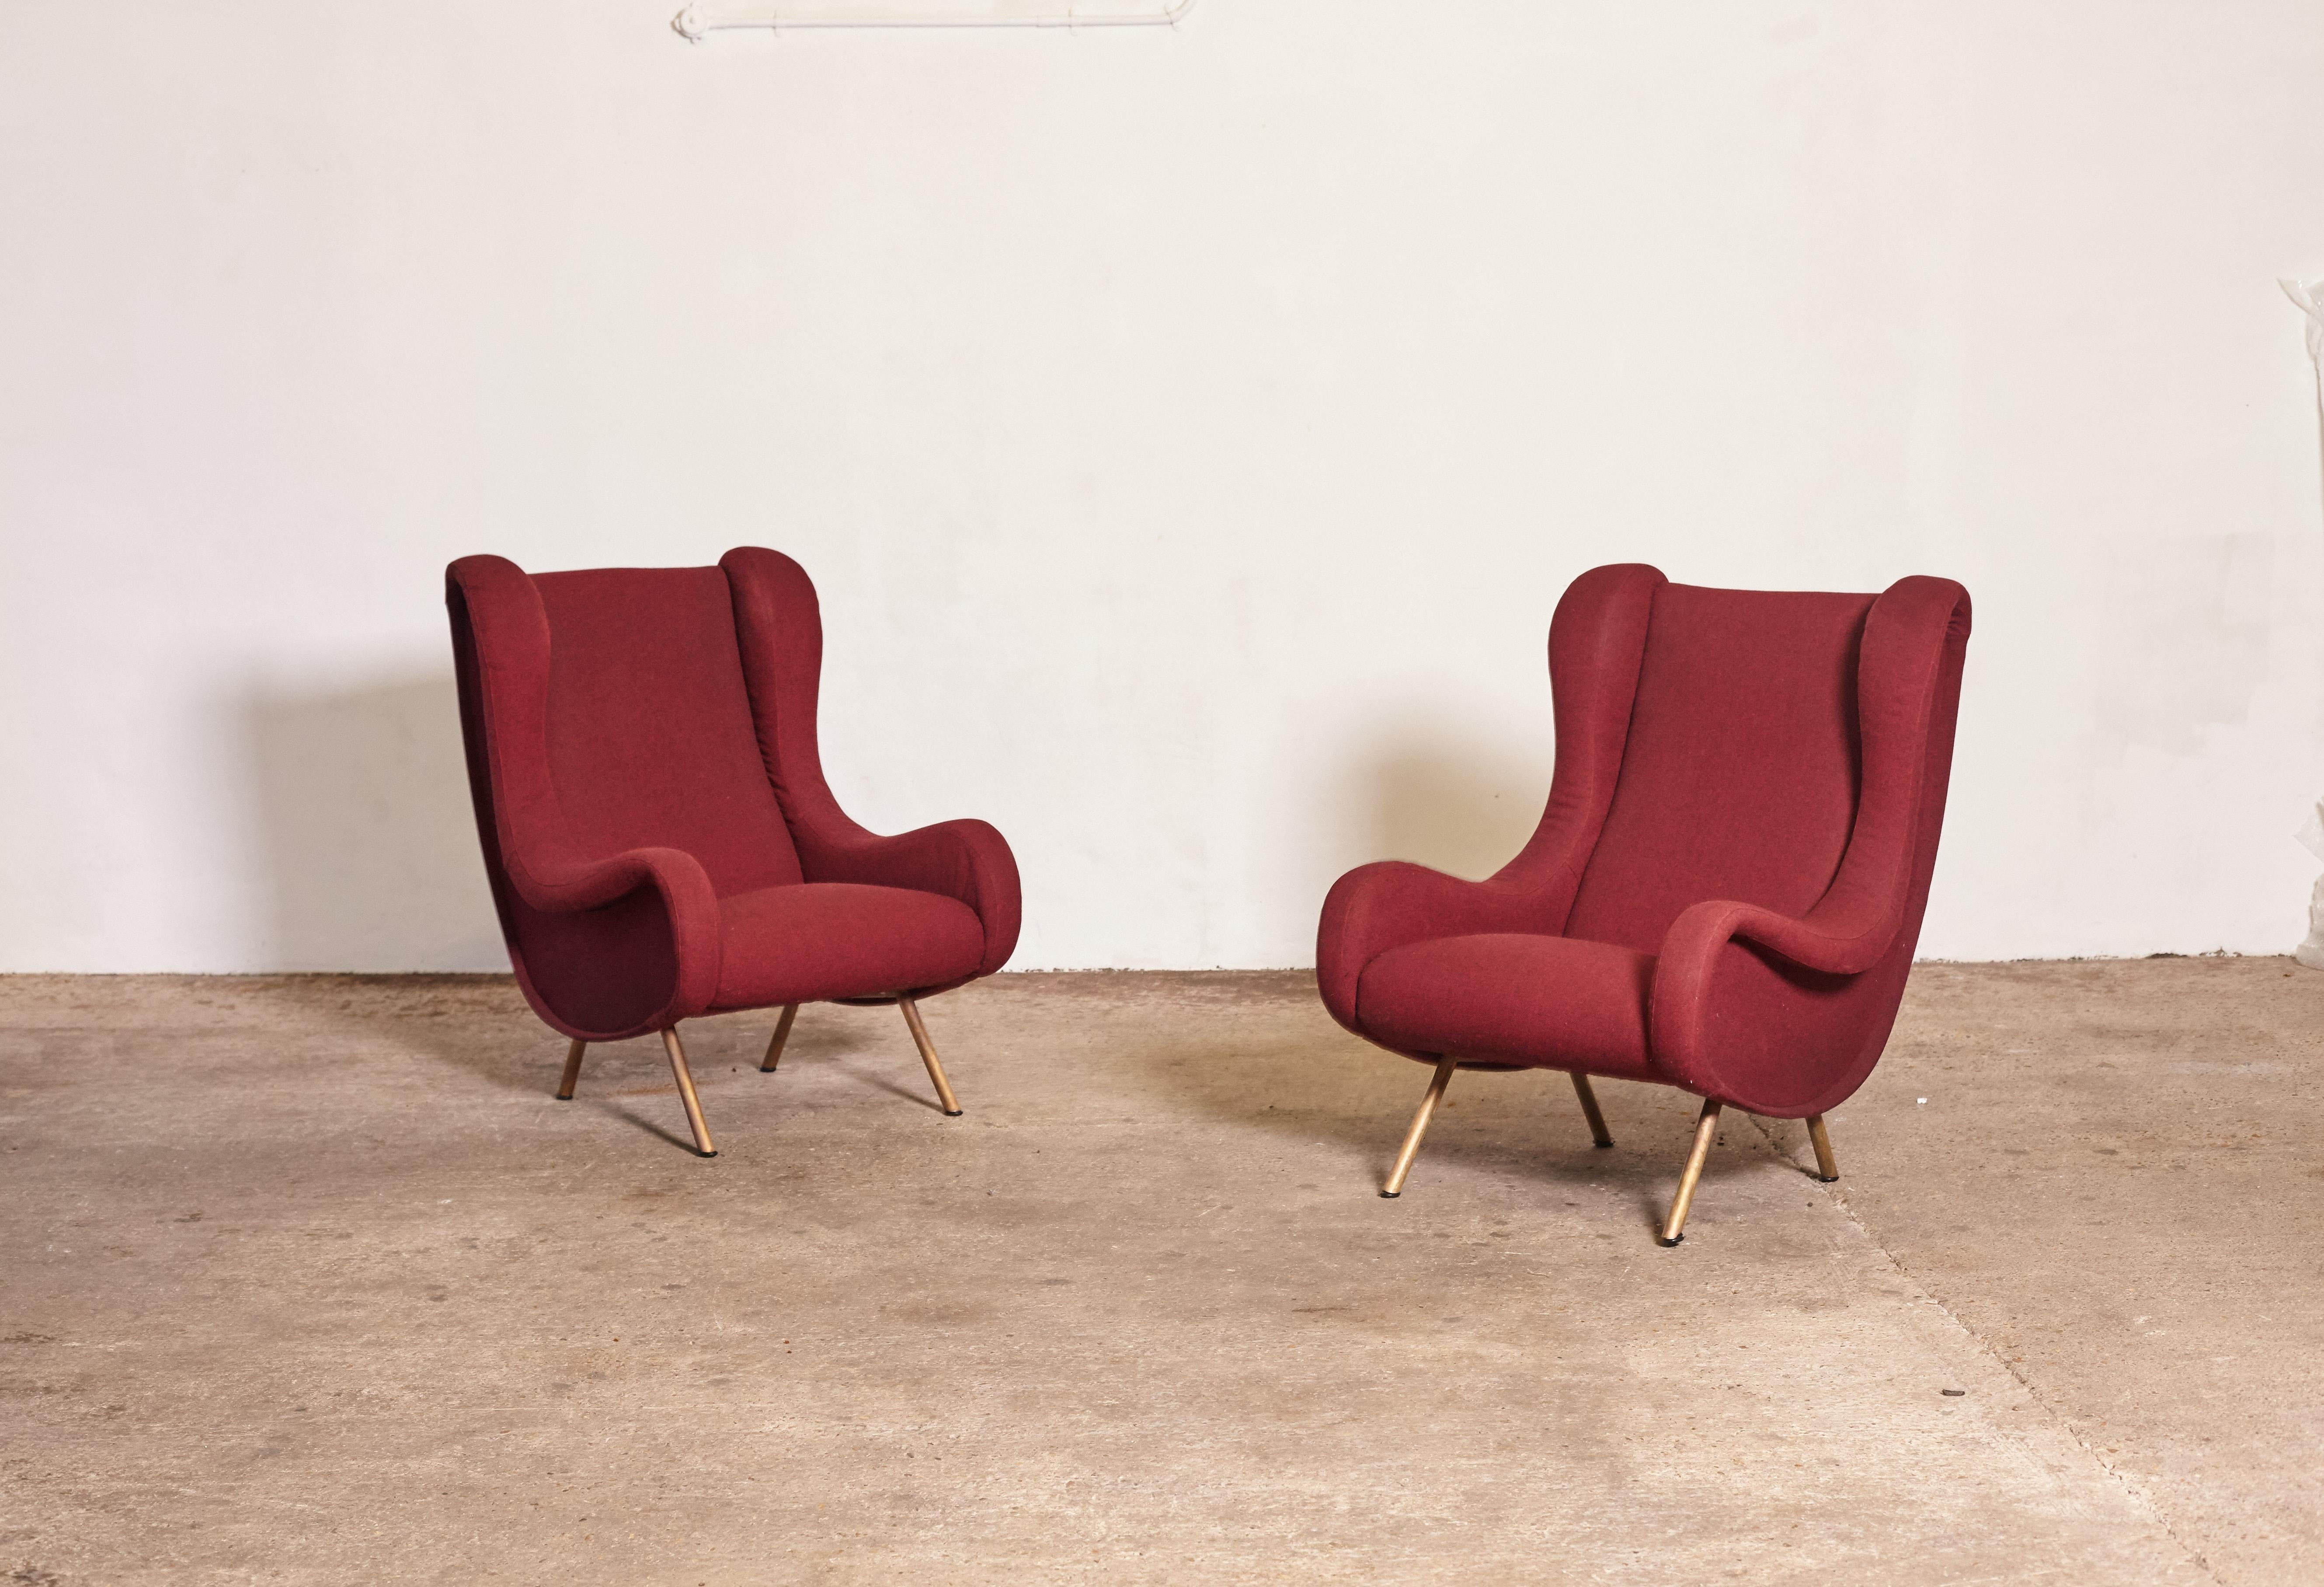 An pair of authentic Marco Zanuso Senior chairs, Arflex, Italy, 1960s. These chairs have been reupholstered in a burgundy wool fabric within the last 5 years. If you would like another fabric we can assist with re-upholstery.




UK customers please